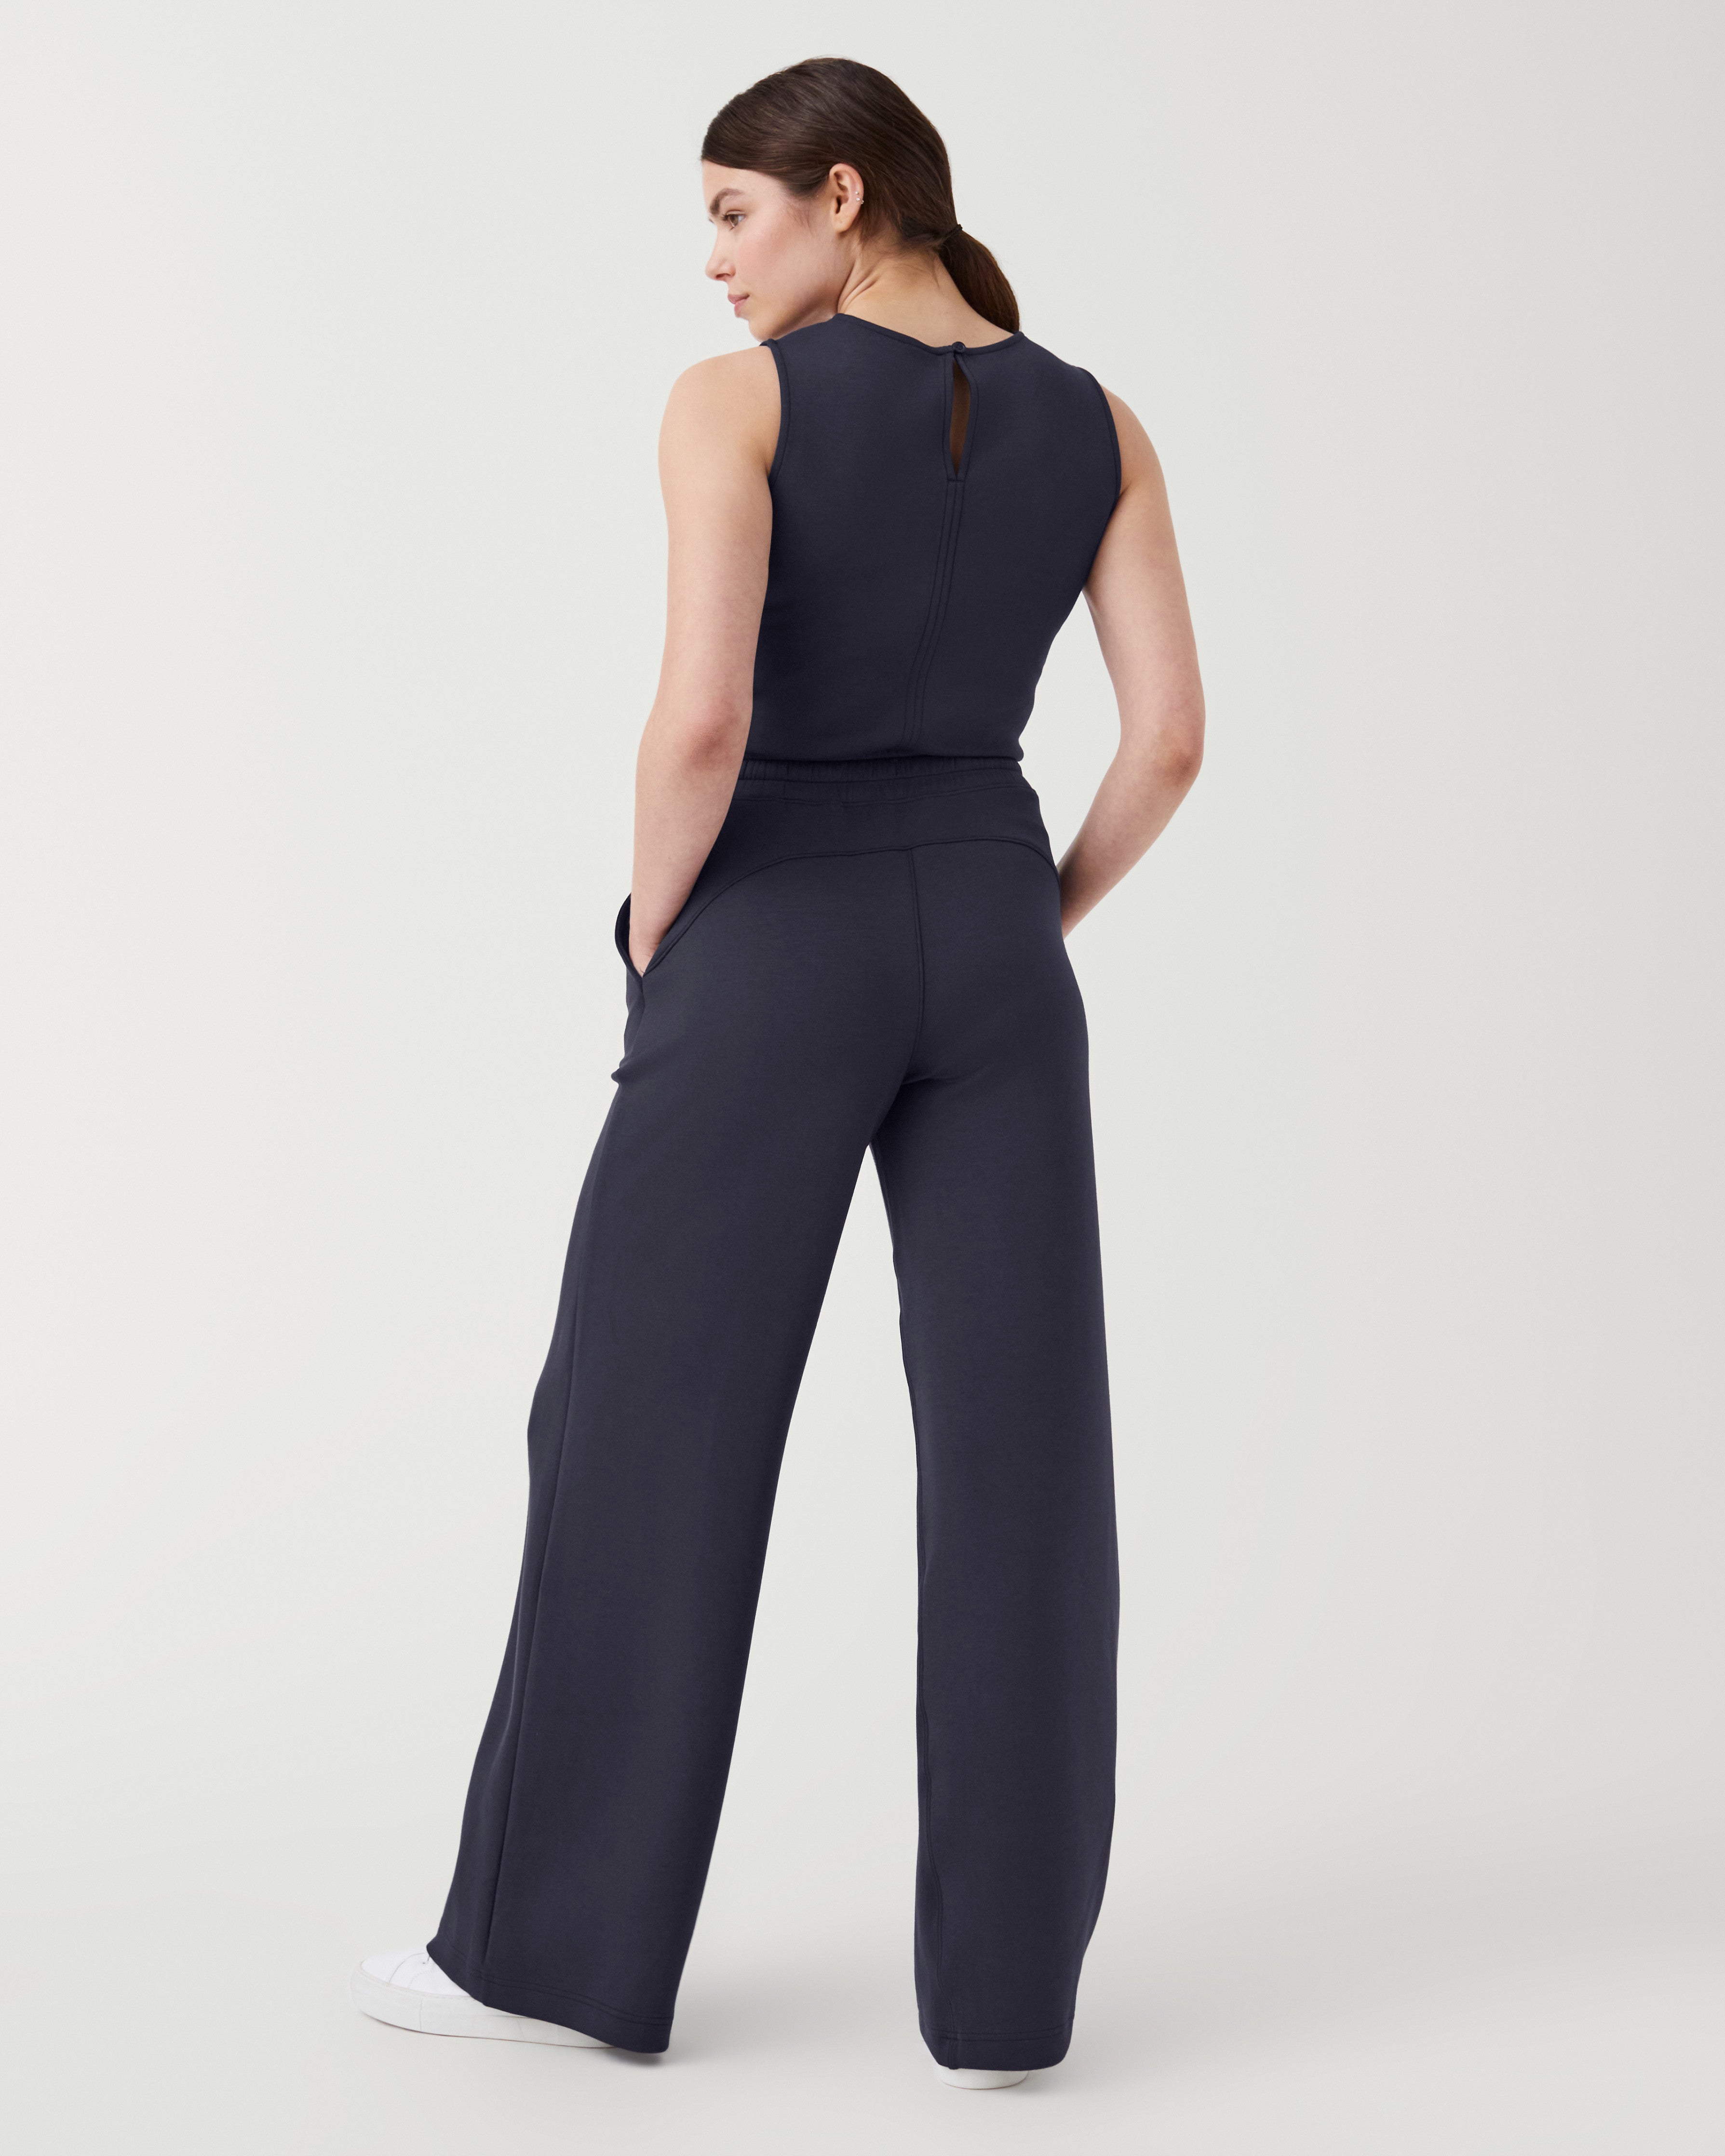 SPANX Air Essentials Jumpsuit-4 - 50 IS NOT OLD - A Fashion And